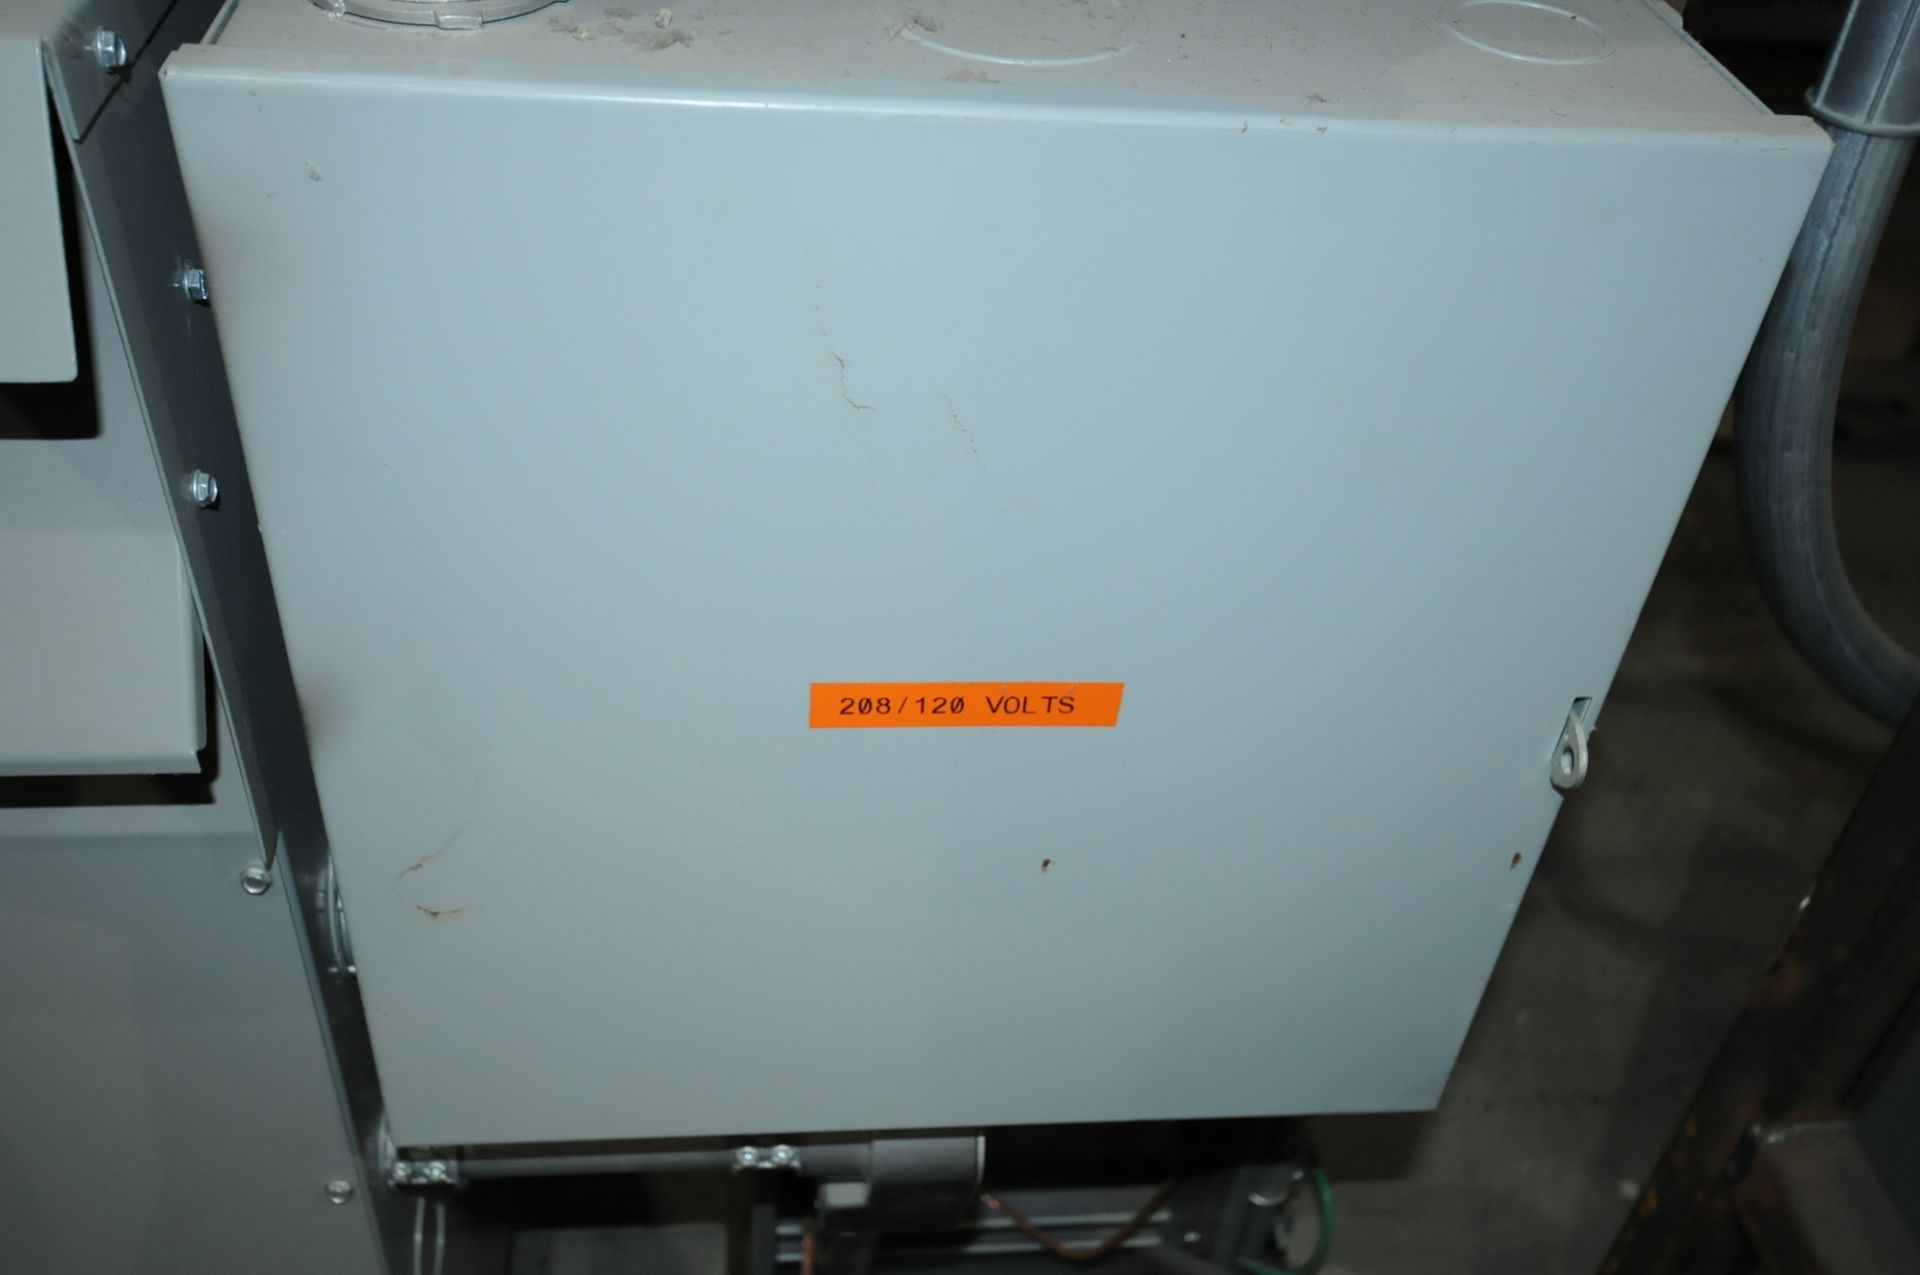 LOT/ HAMMOND 75 KVA 600V 3 PHASE DRY TYPE TRANSFORMER WITH EATON CUTLER-HAMMER 600V DISCONNECT BOX - Image 4 of 4